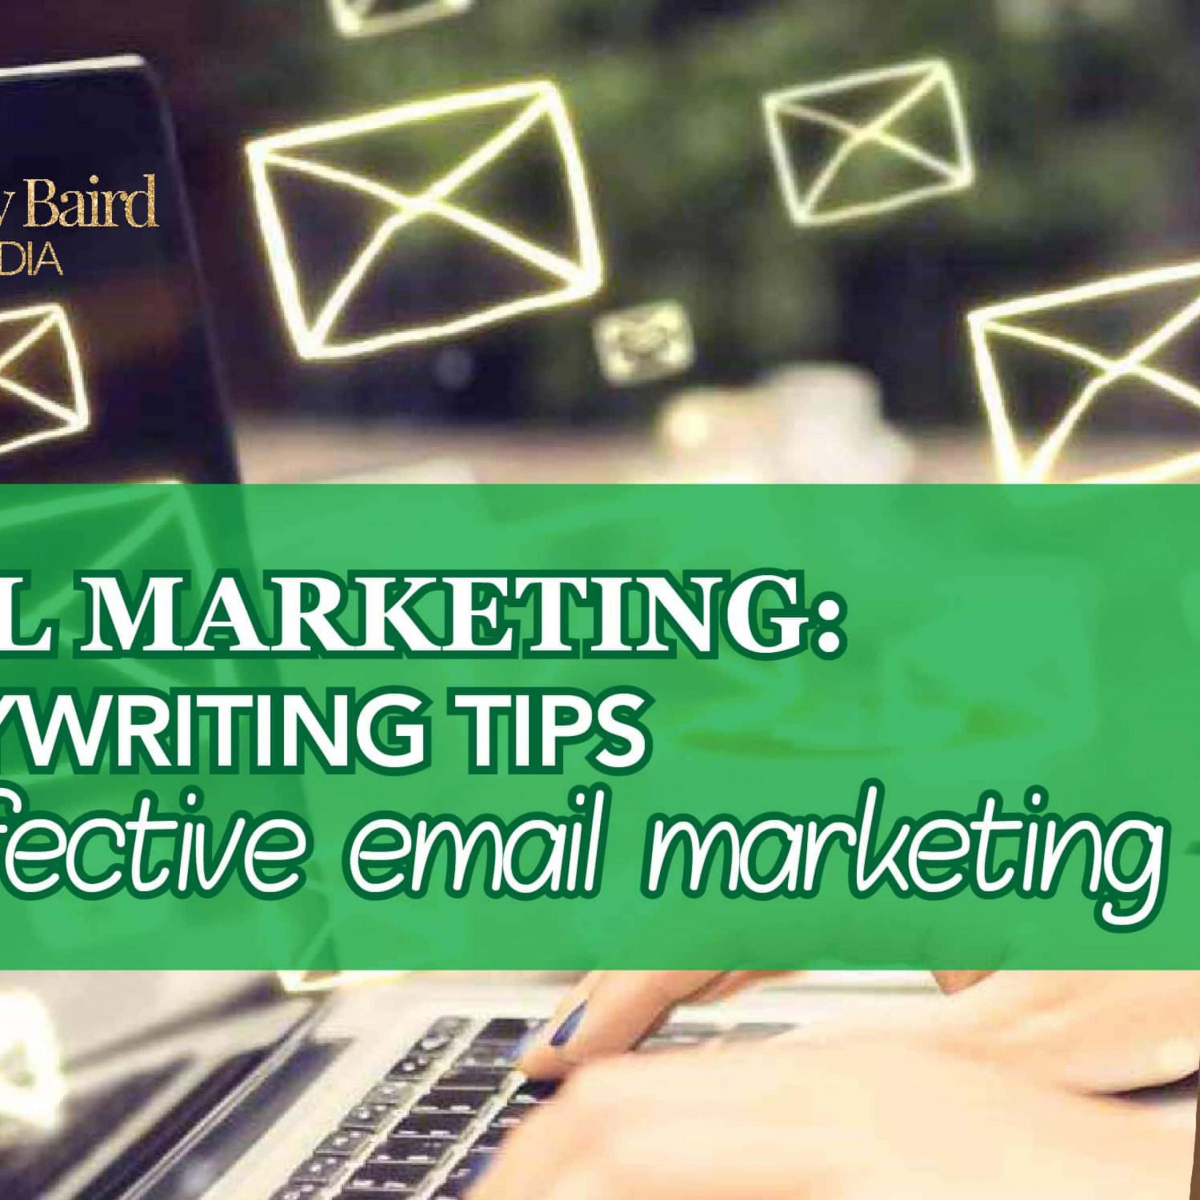 email-marketing-copywriting-tips-for-effective-email-marketing